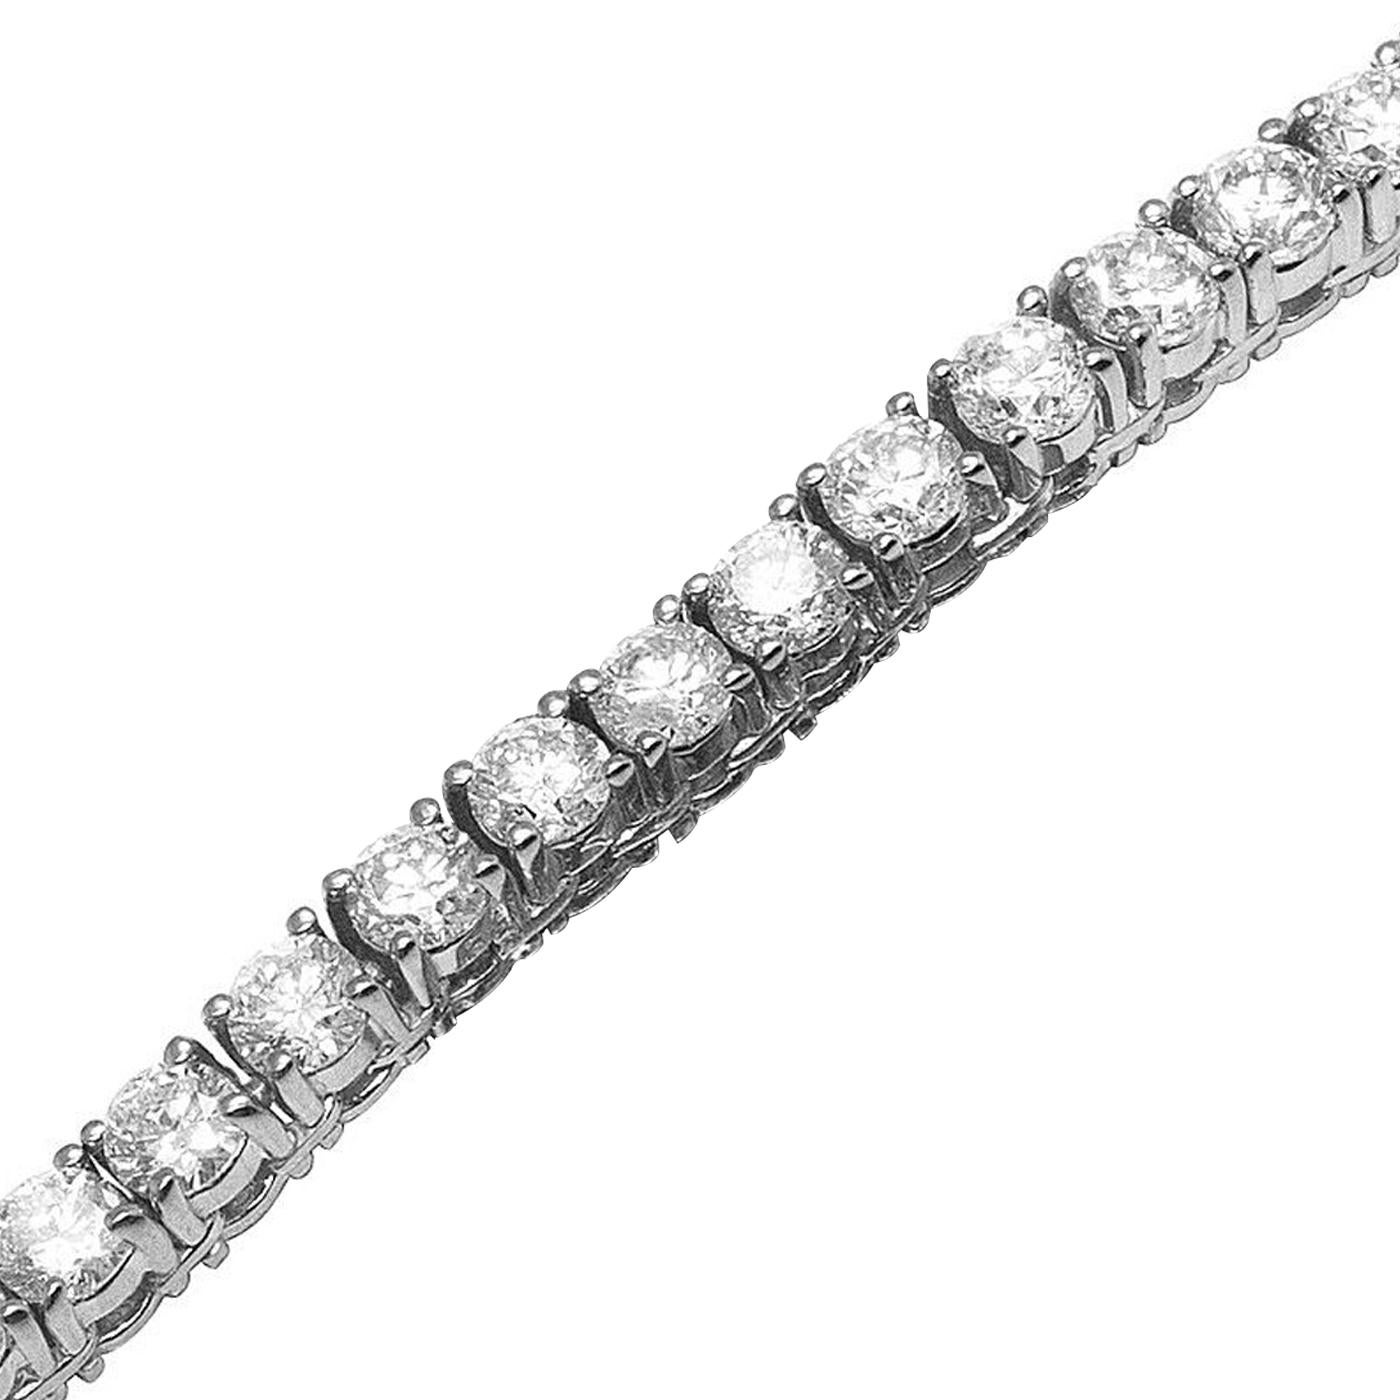 Modernist 21.5ct Round Cut Diamond Tennis Necklace 14K White Gold 18.5 Inches 4-prongs For Sale